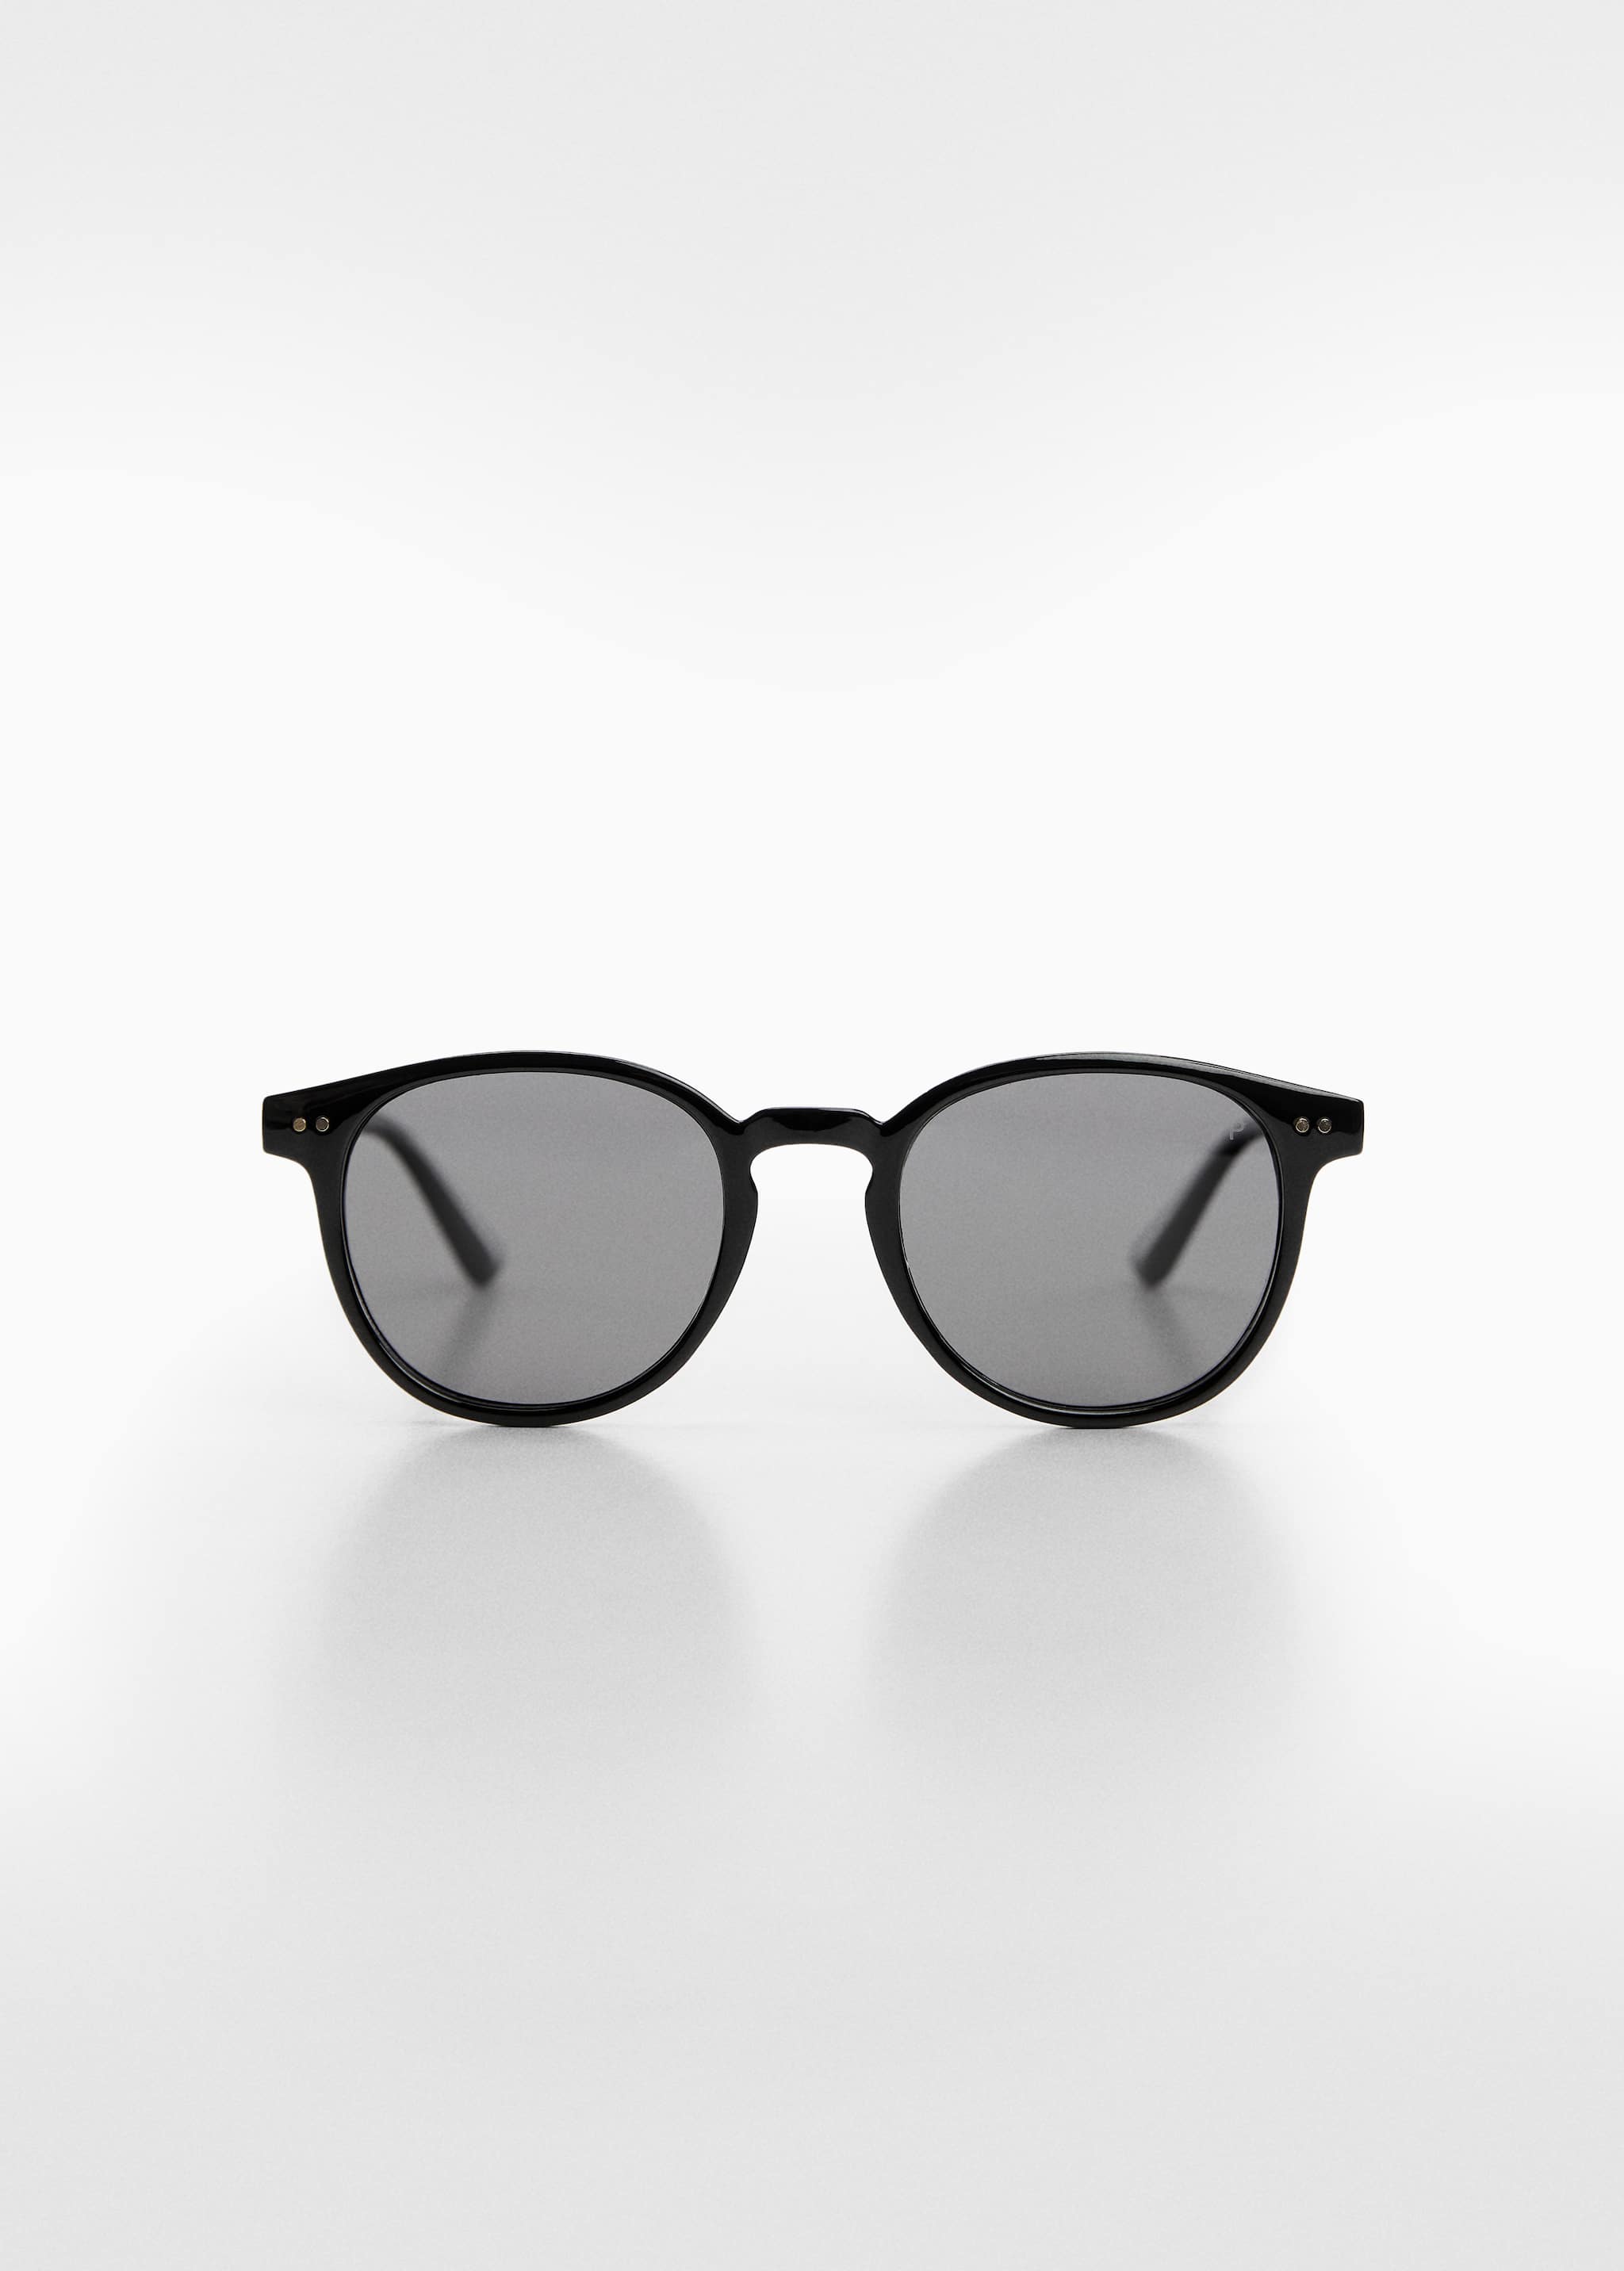 Polarised sunglasses - Article without model